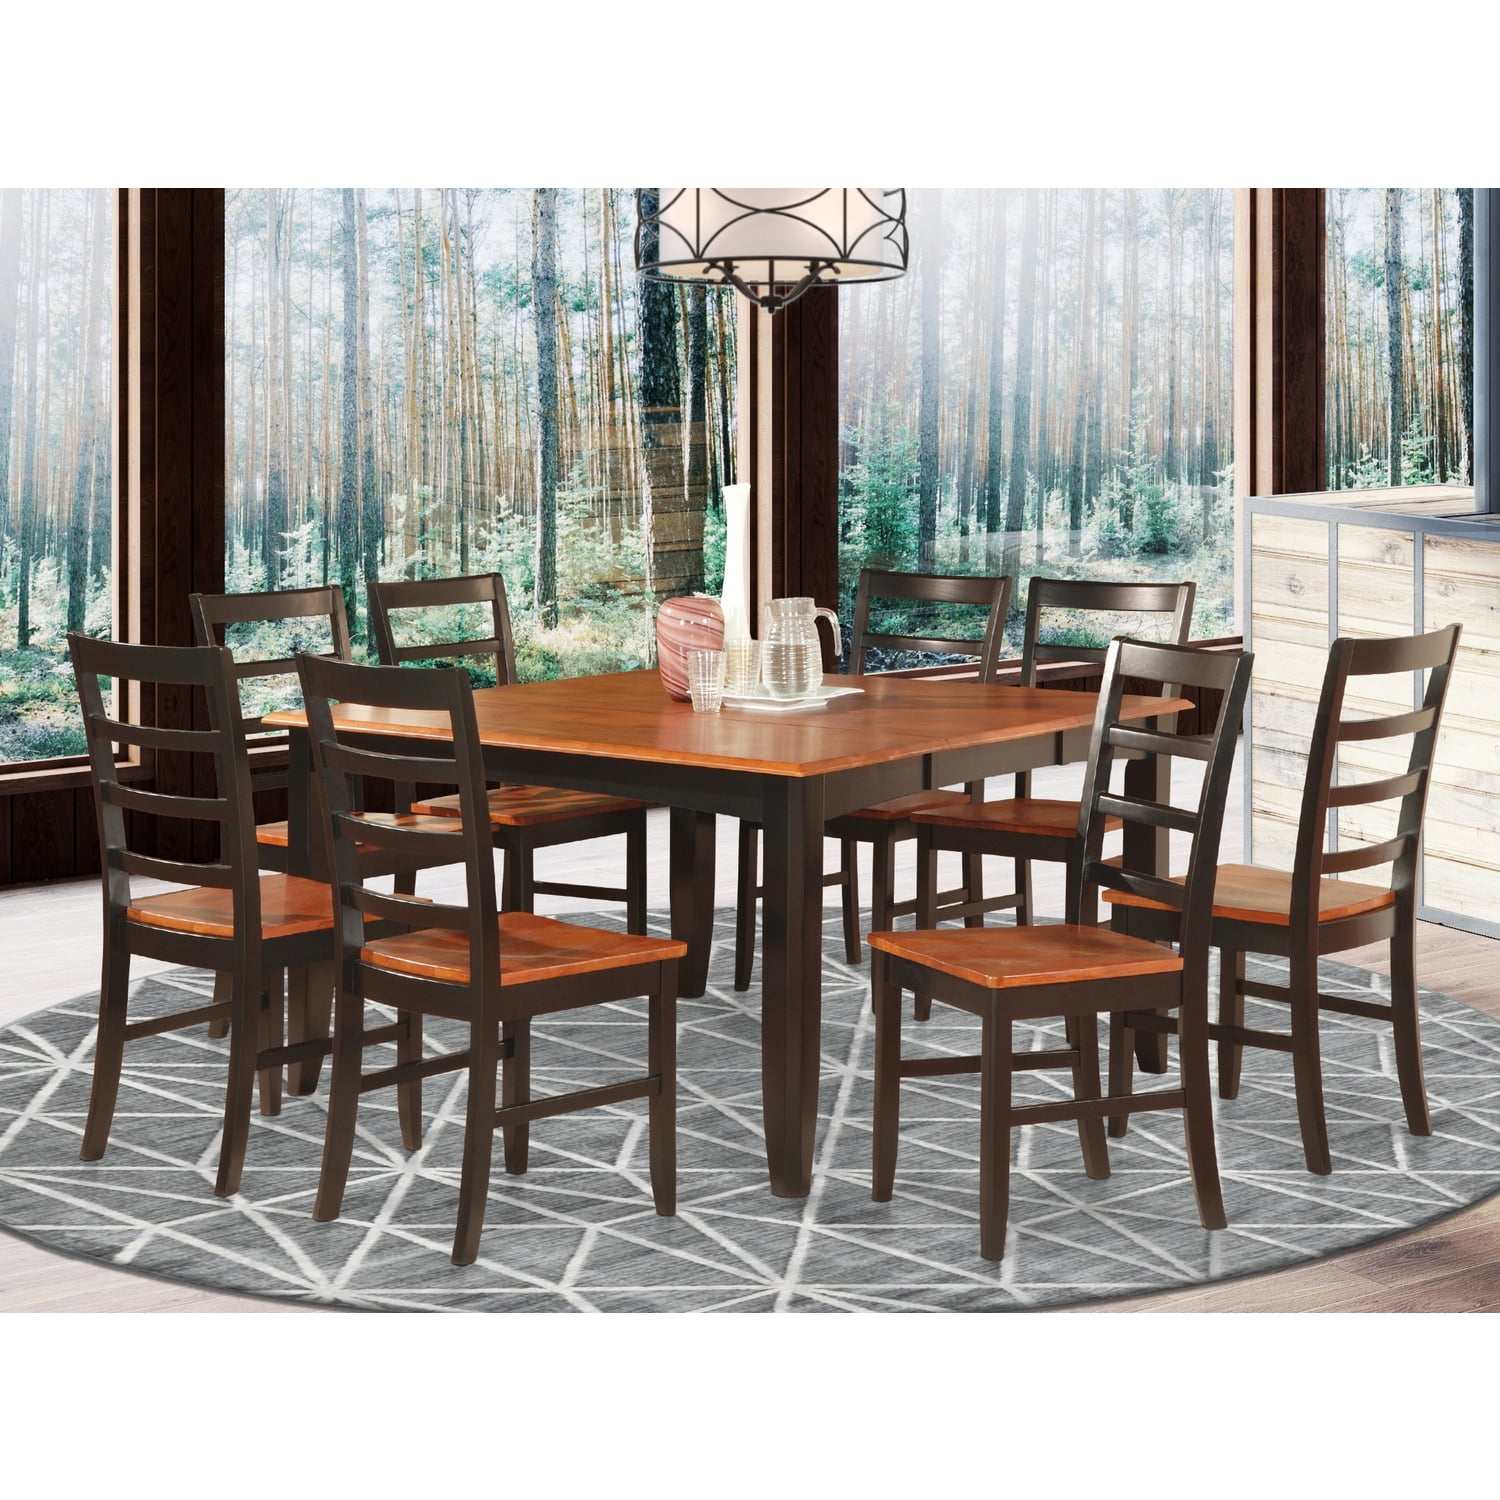 Dining Room Set Square Table, How Big Is A Dining Room Table That Seats 8